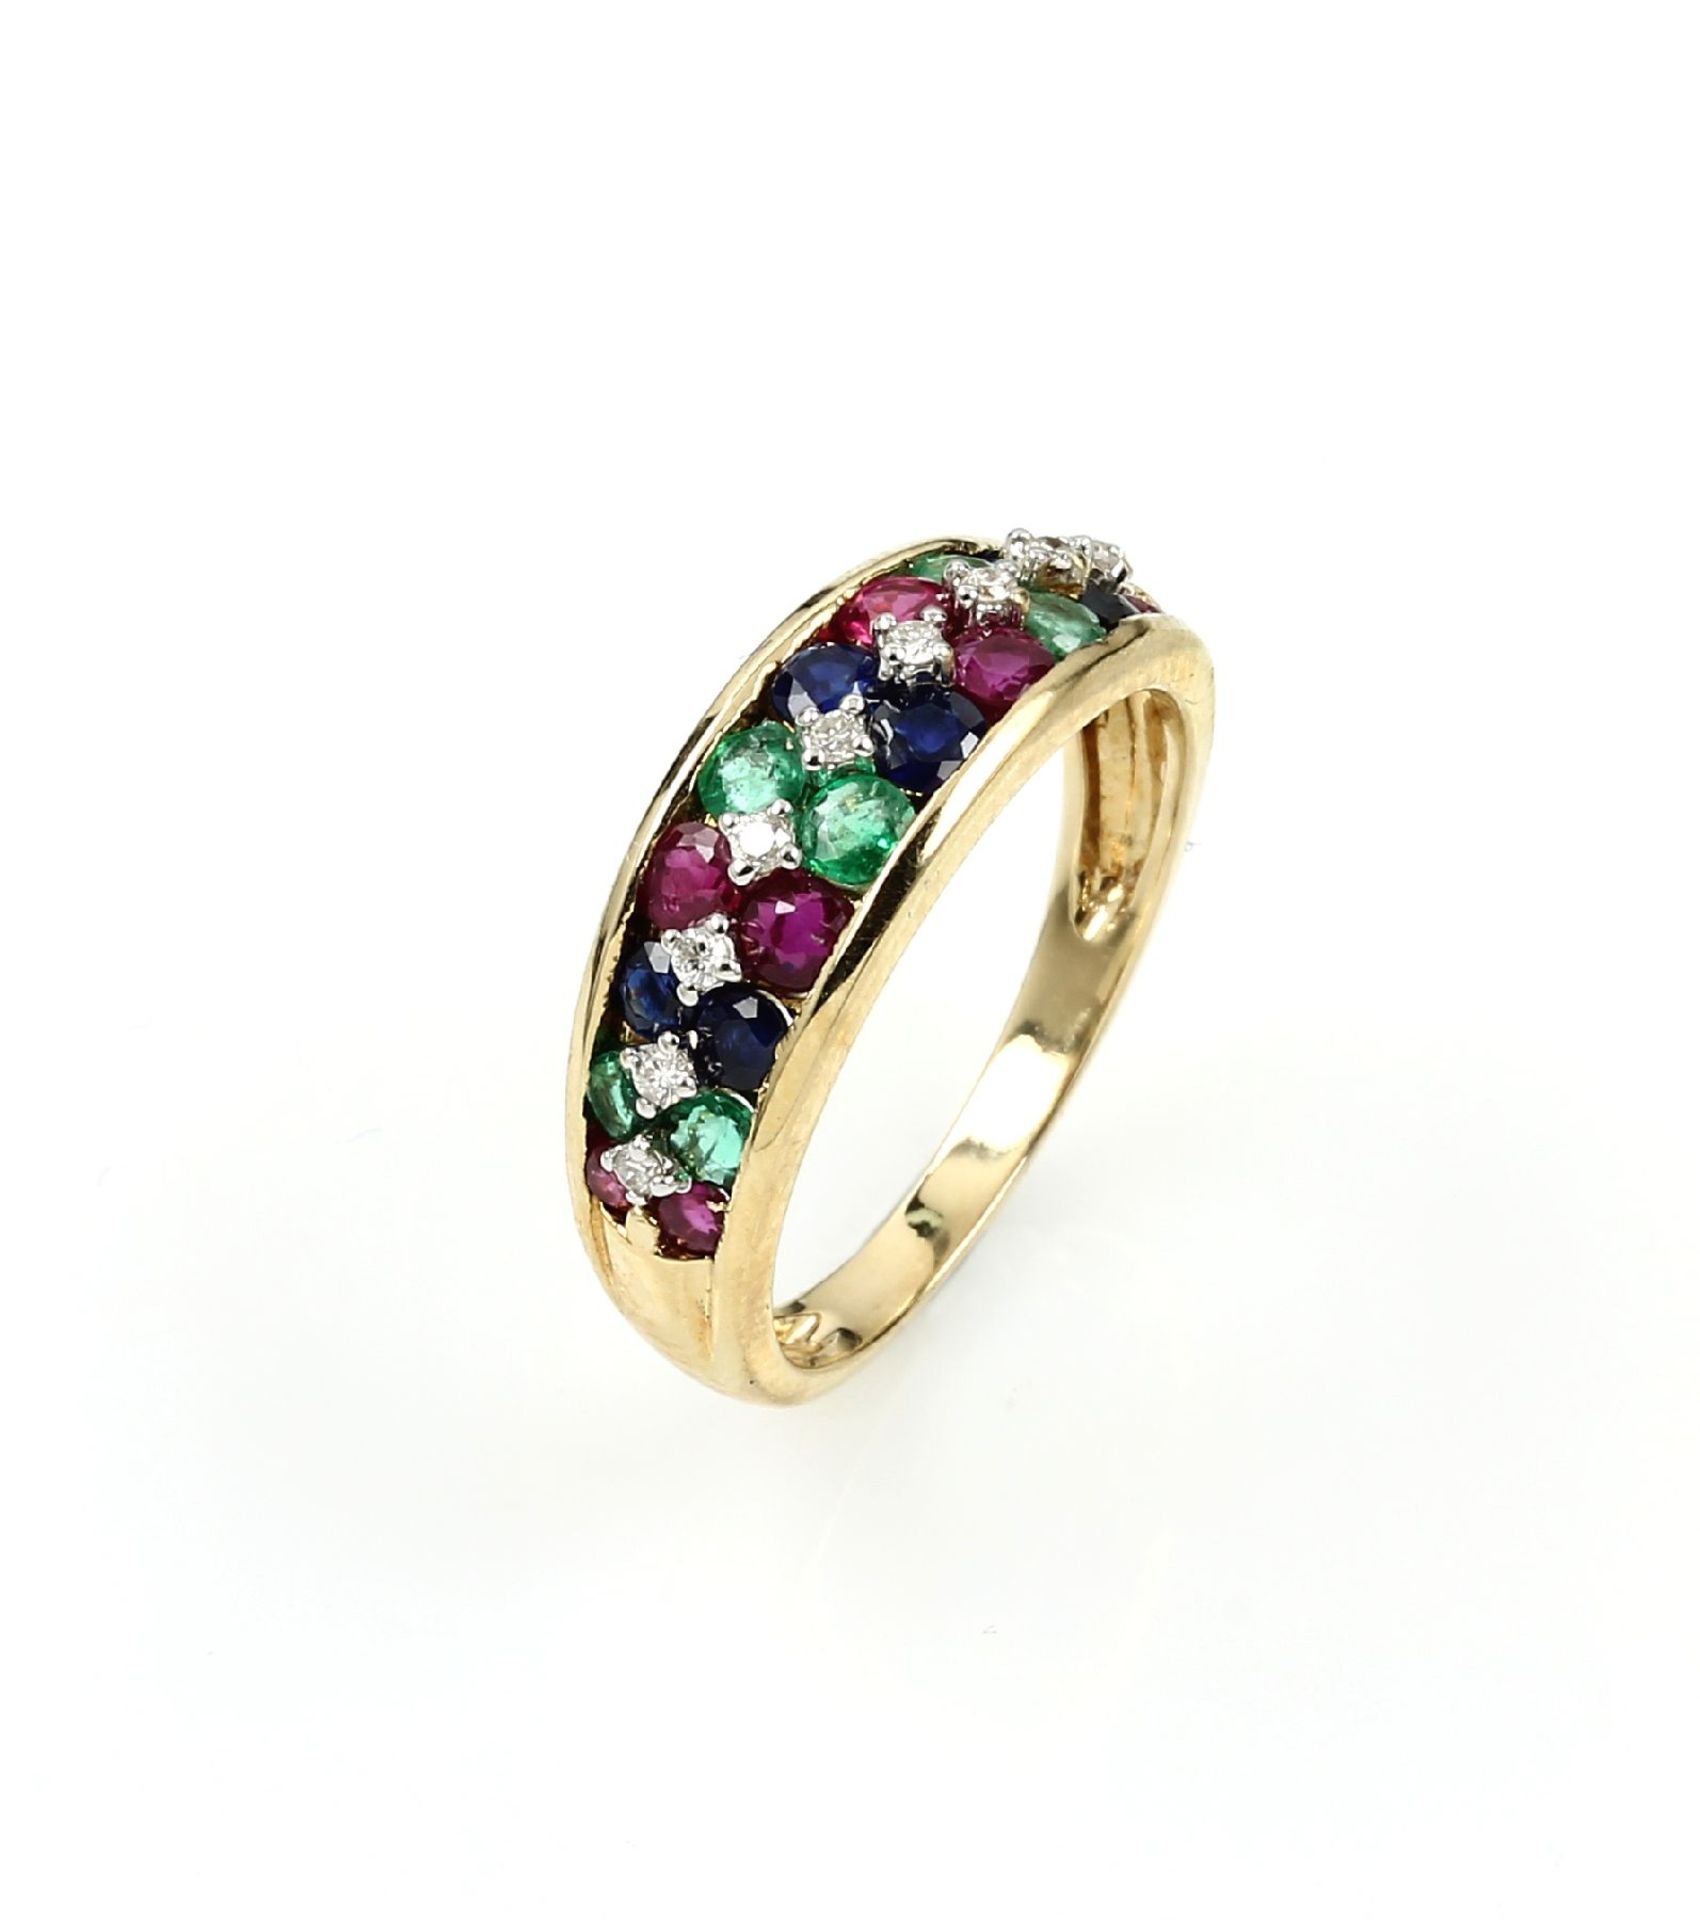 14 kt gold ring with coloured stones and brilliants , YG 585/000, round bevelled rubies, sapphires